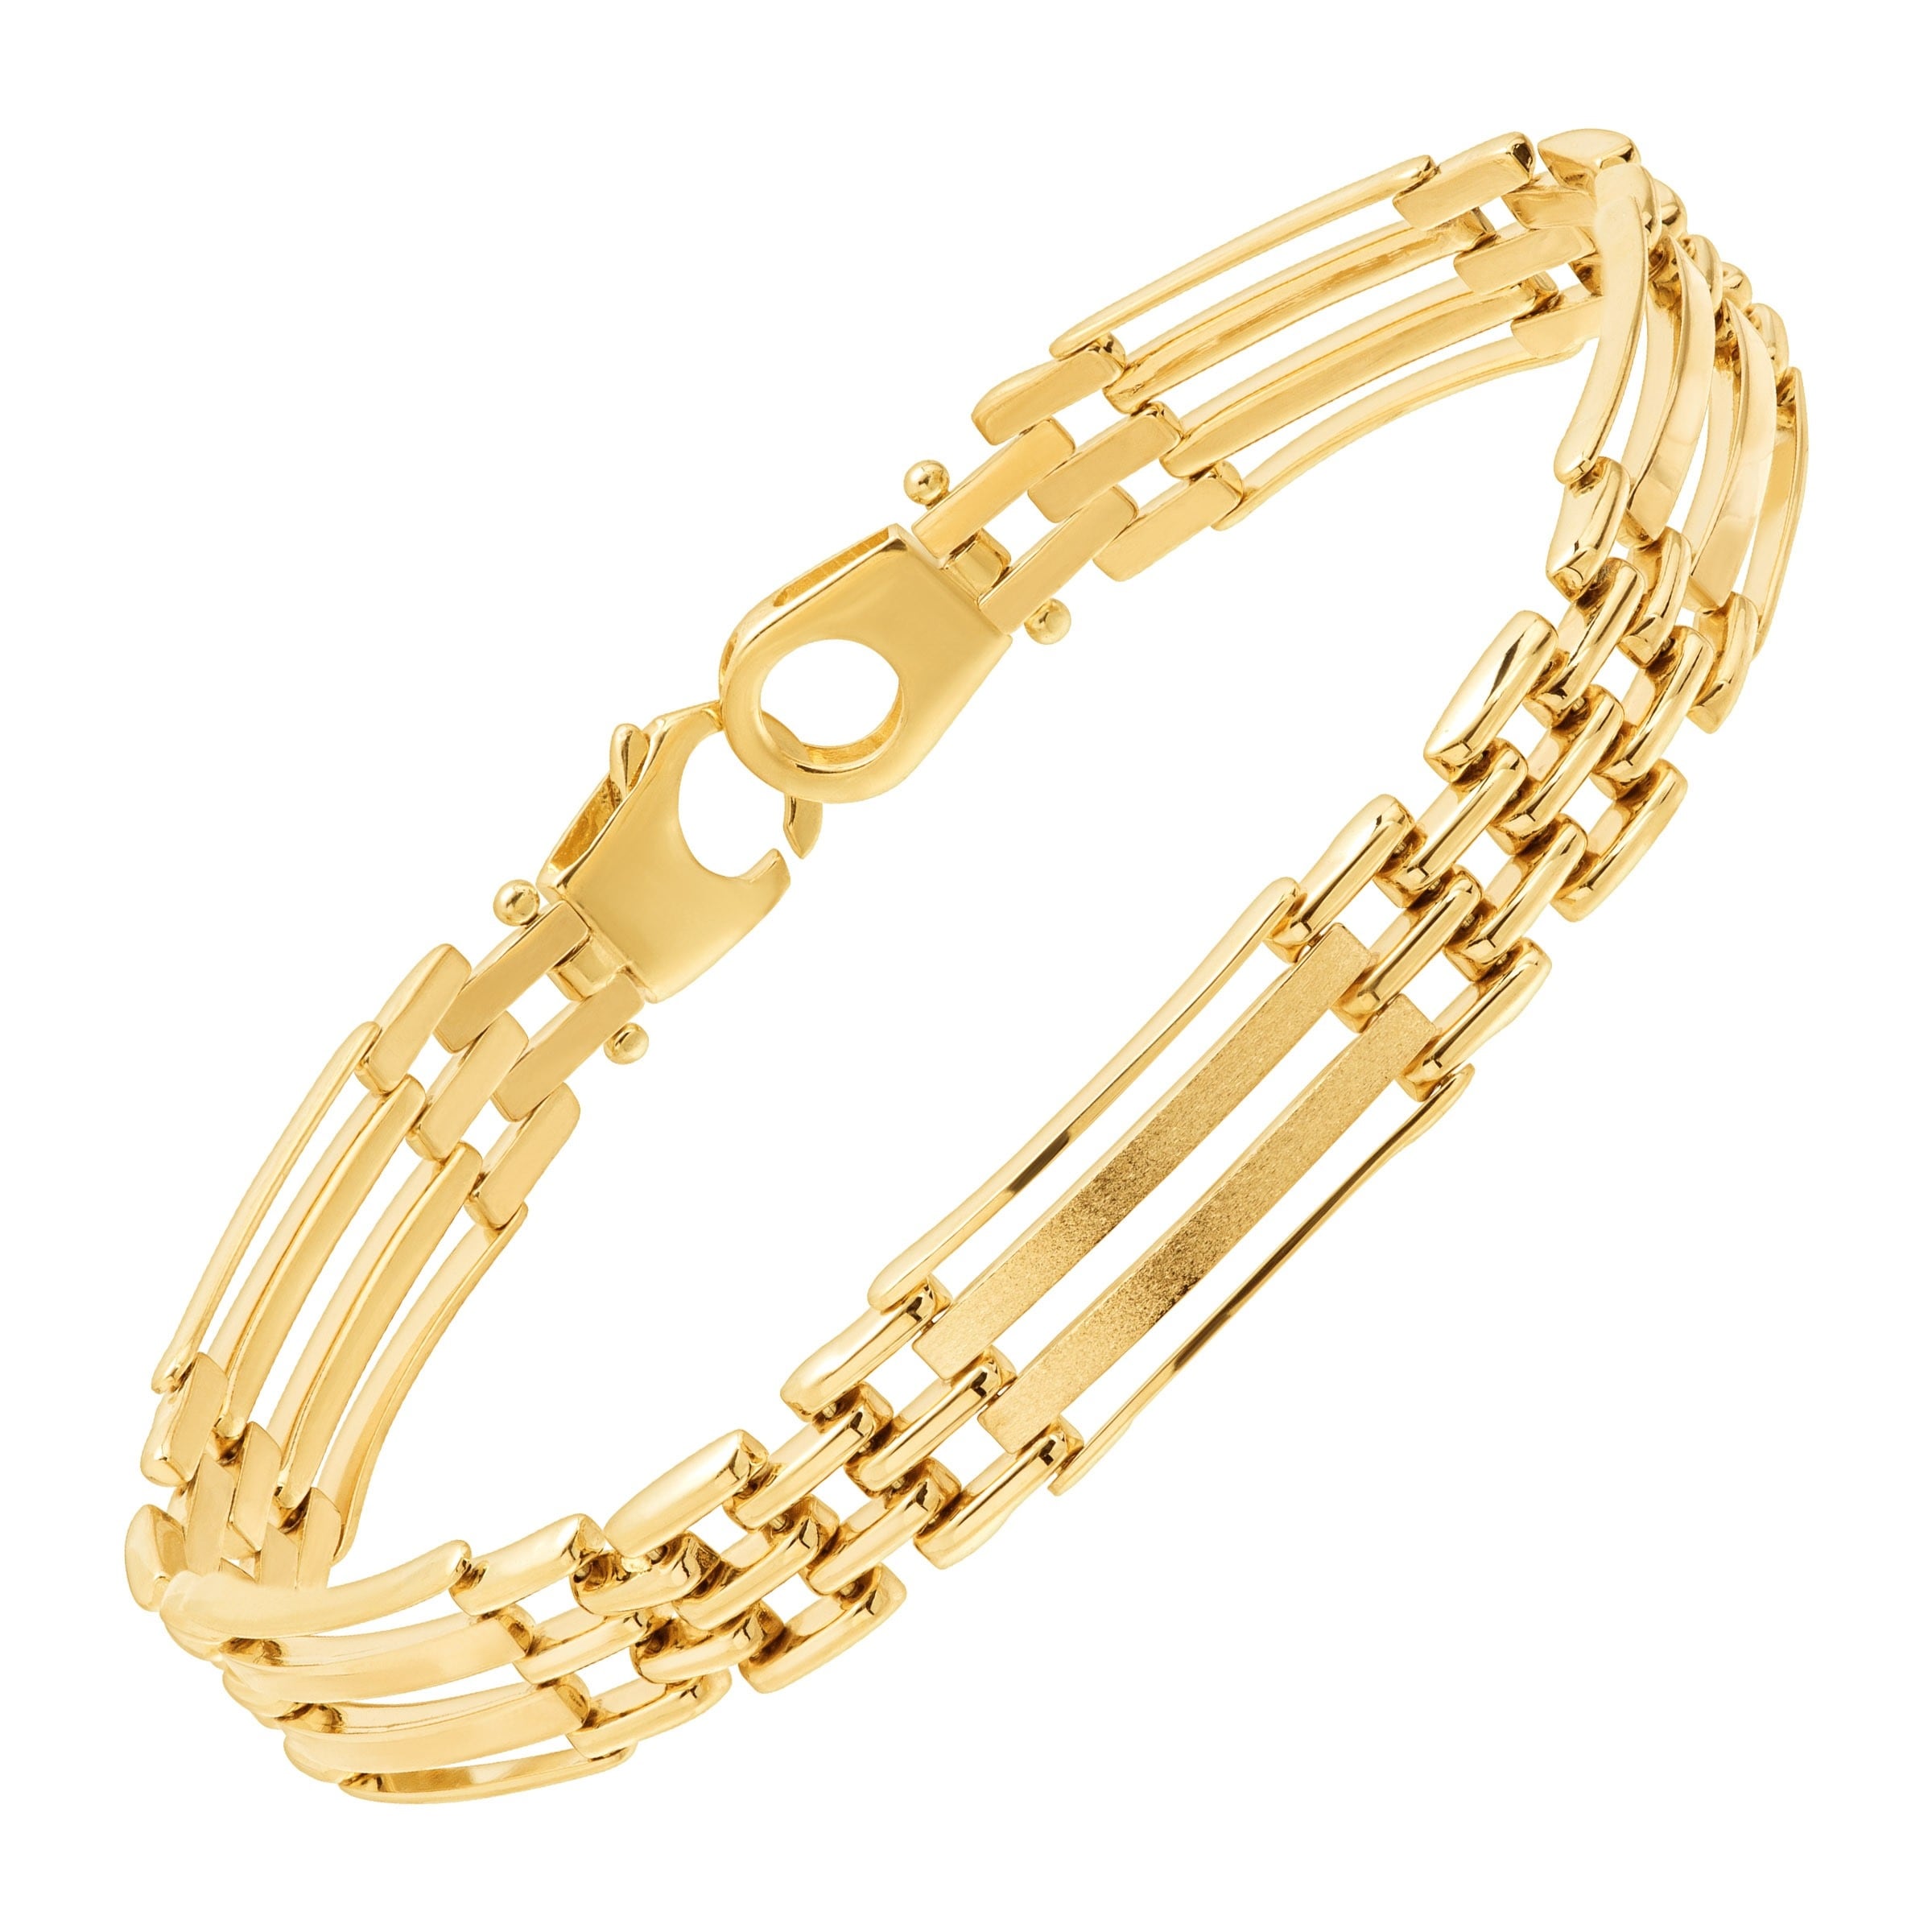 Panther Link Chain Bracelet in 10K Gold 